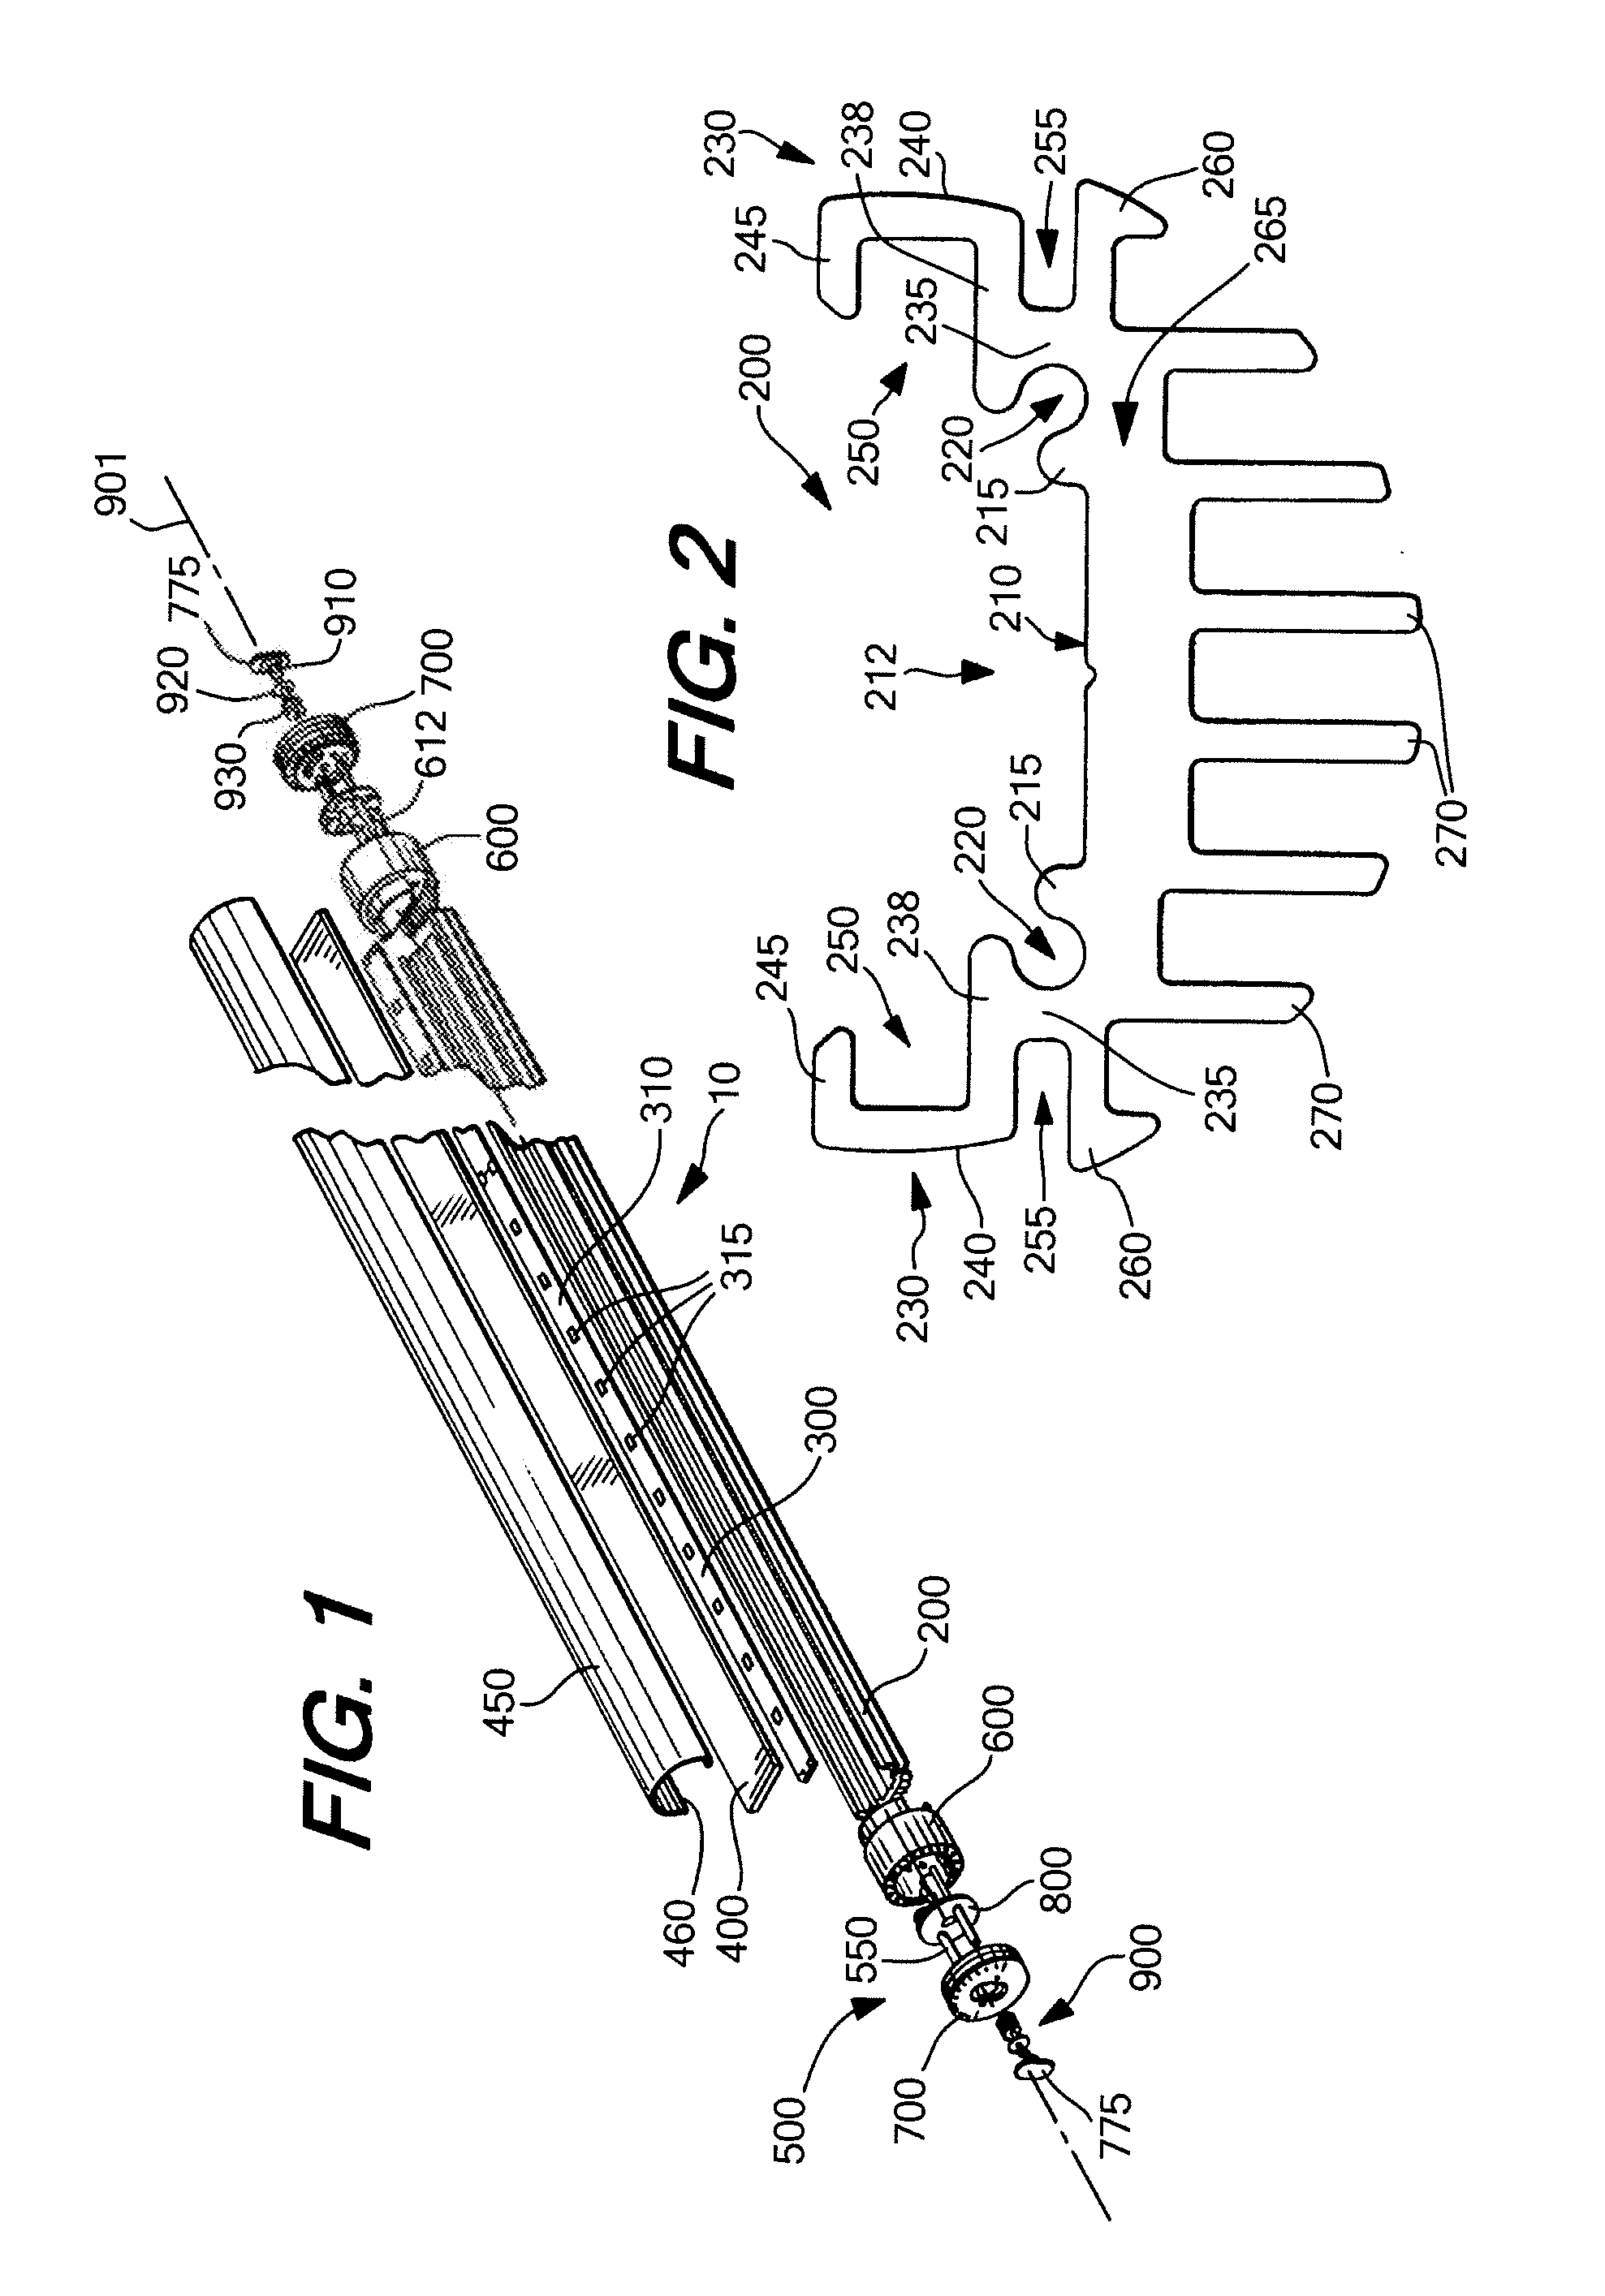 Multi-adjustable replacement LED lighting element